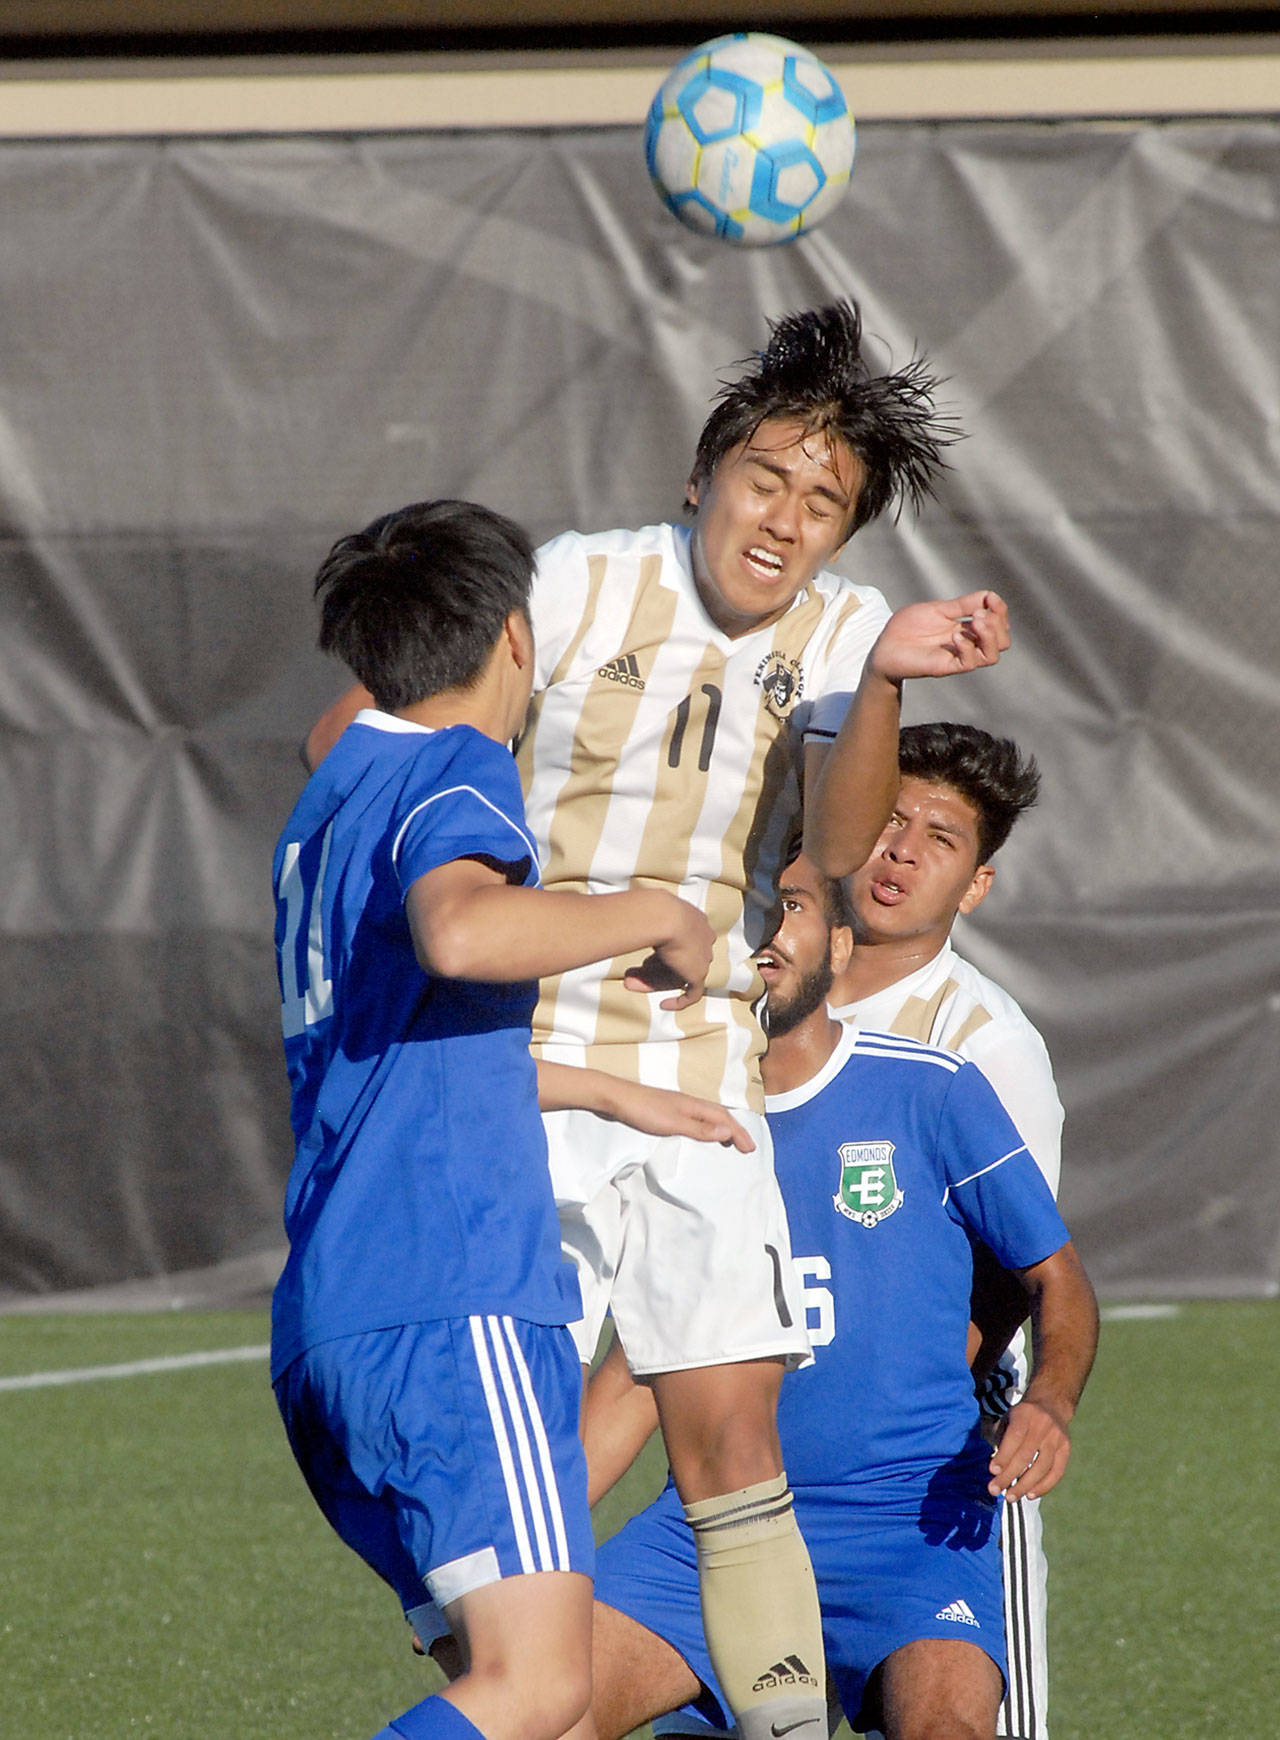 Keith Thorpe/Peninsula Daily News                                Peninsula’s Calvin Aguirre, center, takes the header surrounded by Edmonds’ Masahiro Ichikawa, left, and Rafaiel Dawood on Wednesday in Port Angeles. Backing the play was Peninsula’s Manny Lopez, right.